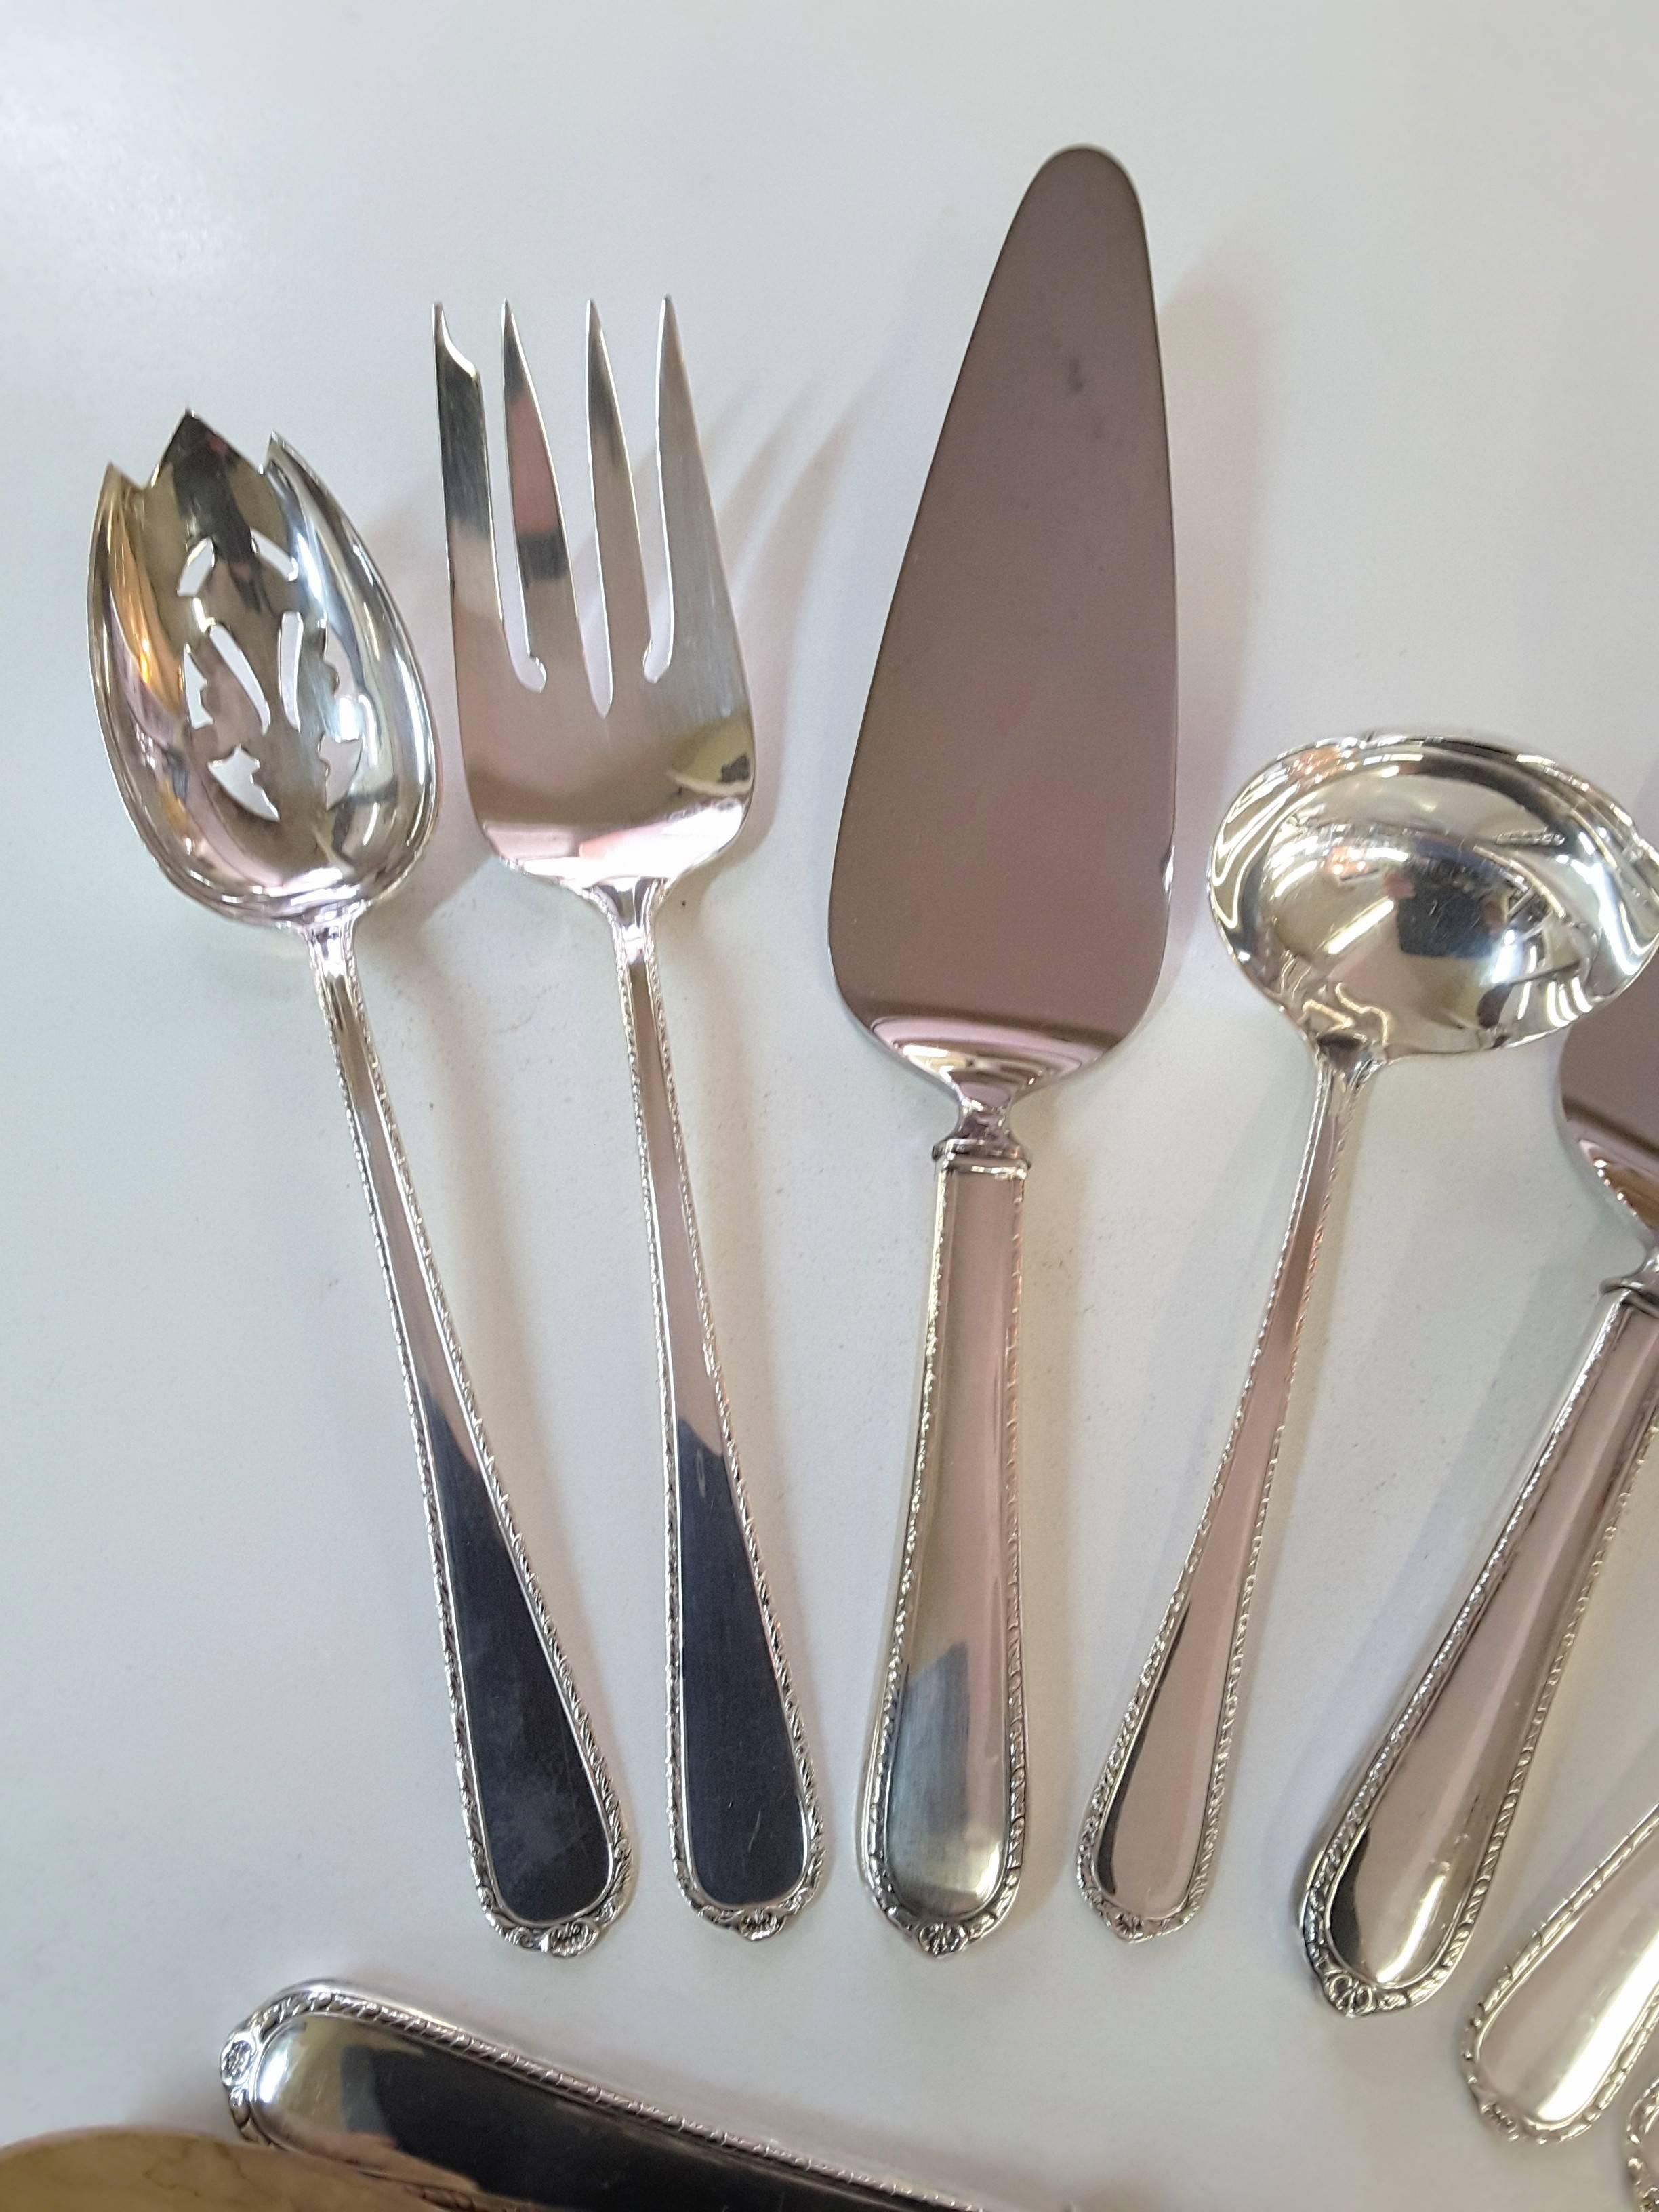 11 serving pieces of pine tree international sterling silver flatware, A nice compliment of serving pieces to finish off your flatware set, presentation for virtually every course. The 11 serving pieces consist of a carving knife and meat fork set,